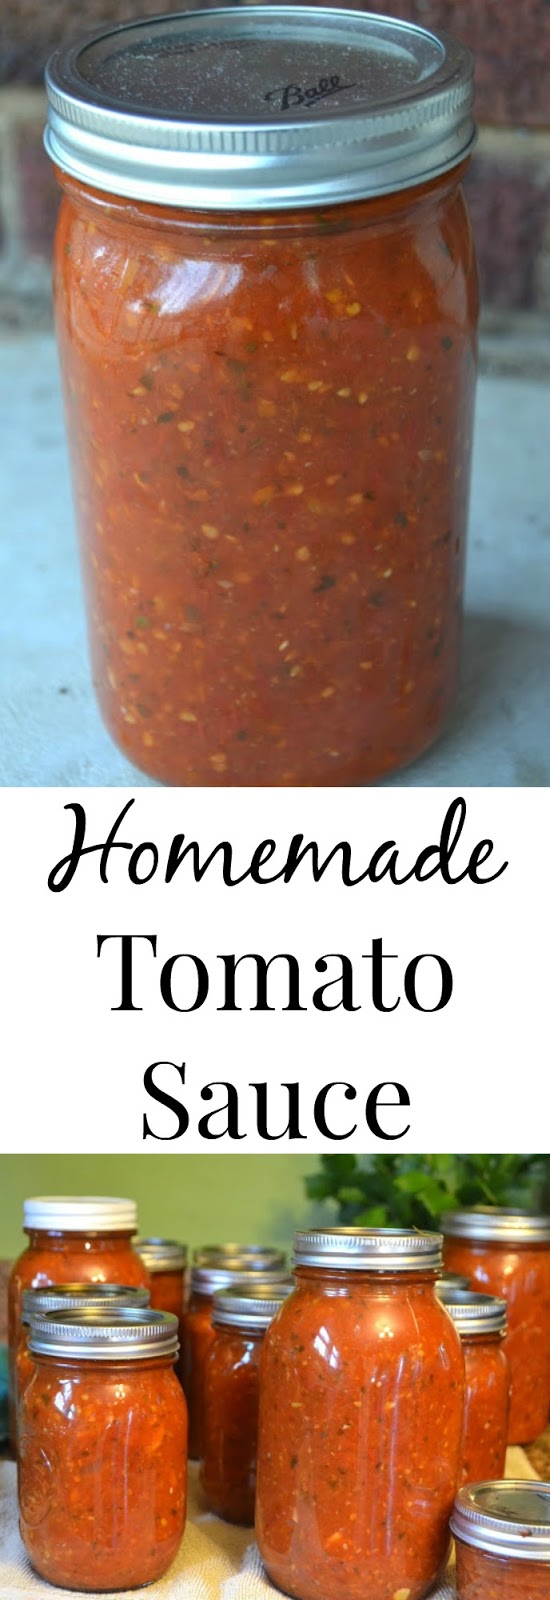 When you have too many garden or farmer's market tomatoes to use, make this Homemade Tomato Sauce! It can be canned or frozen and tastes just as fresh as when you made it! www.nutritionistreviews.com